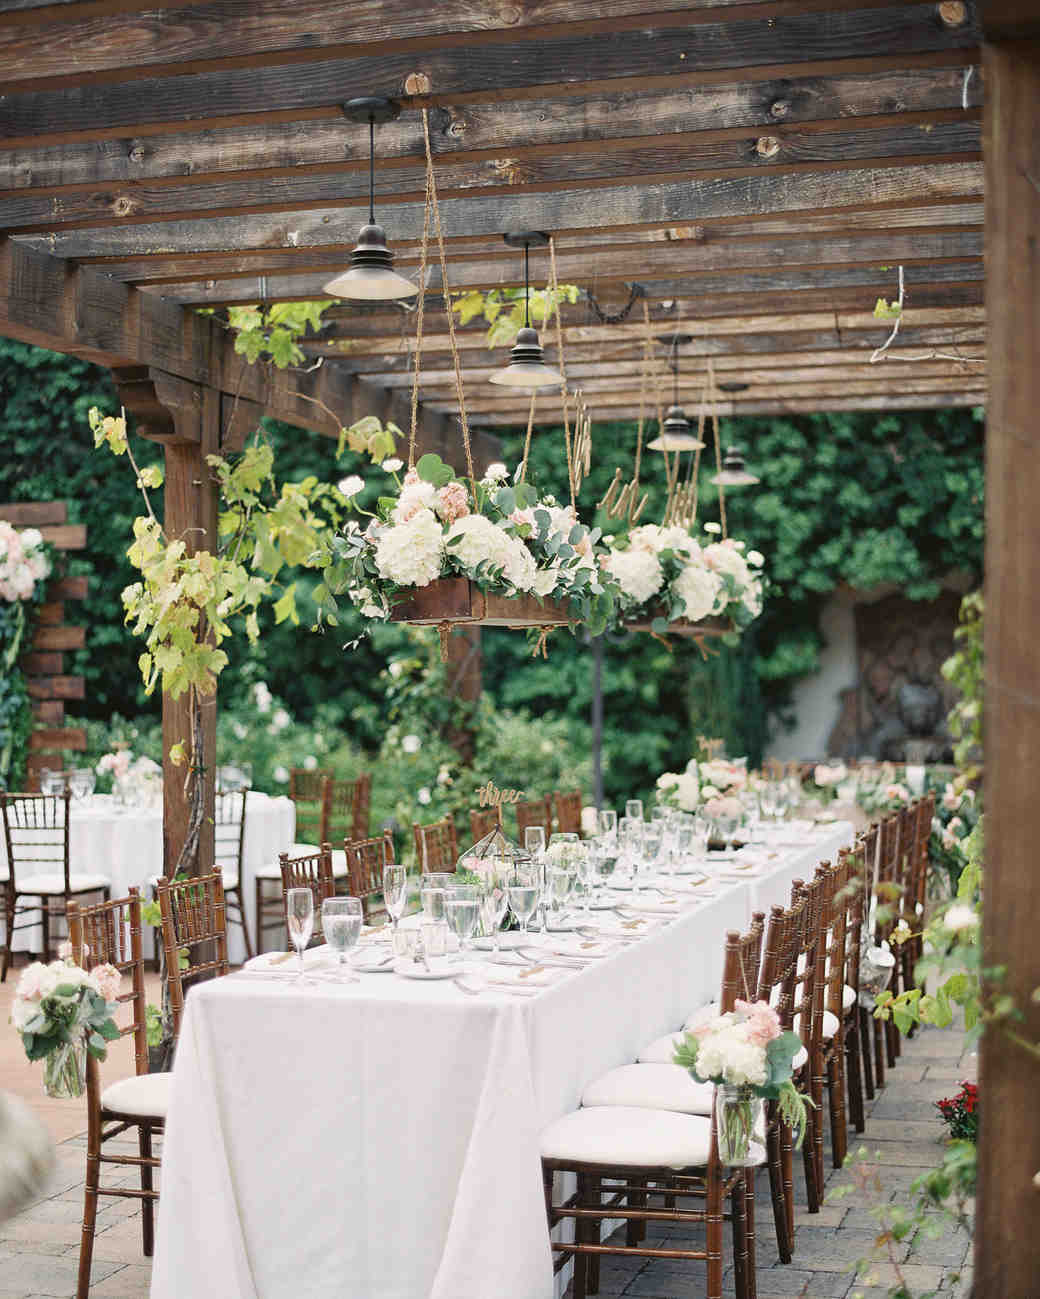 Wedding Head Table Decorations
 28 Ideas for Sitting Pretty at Your Head Table